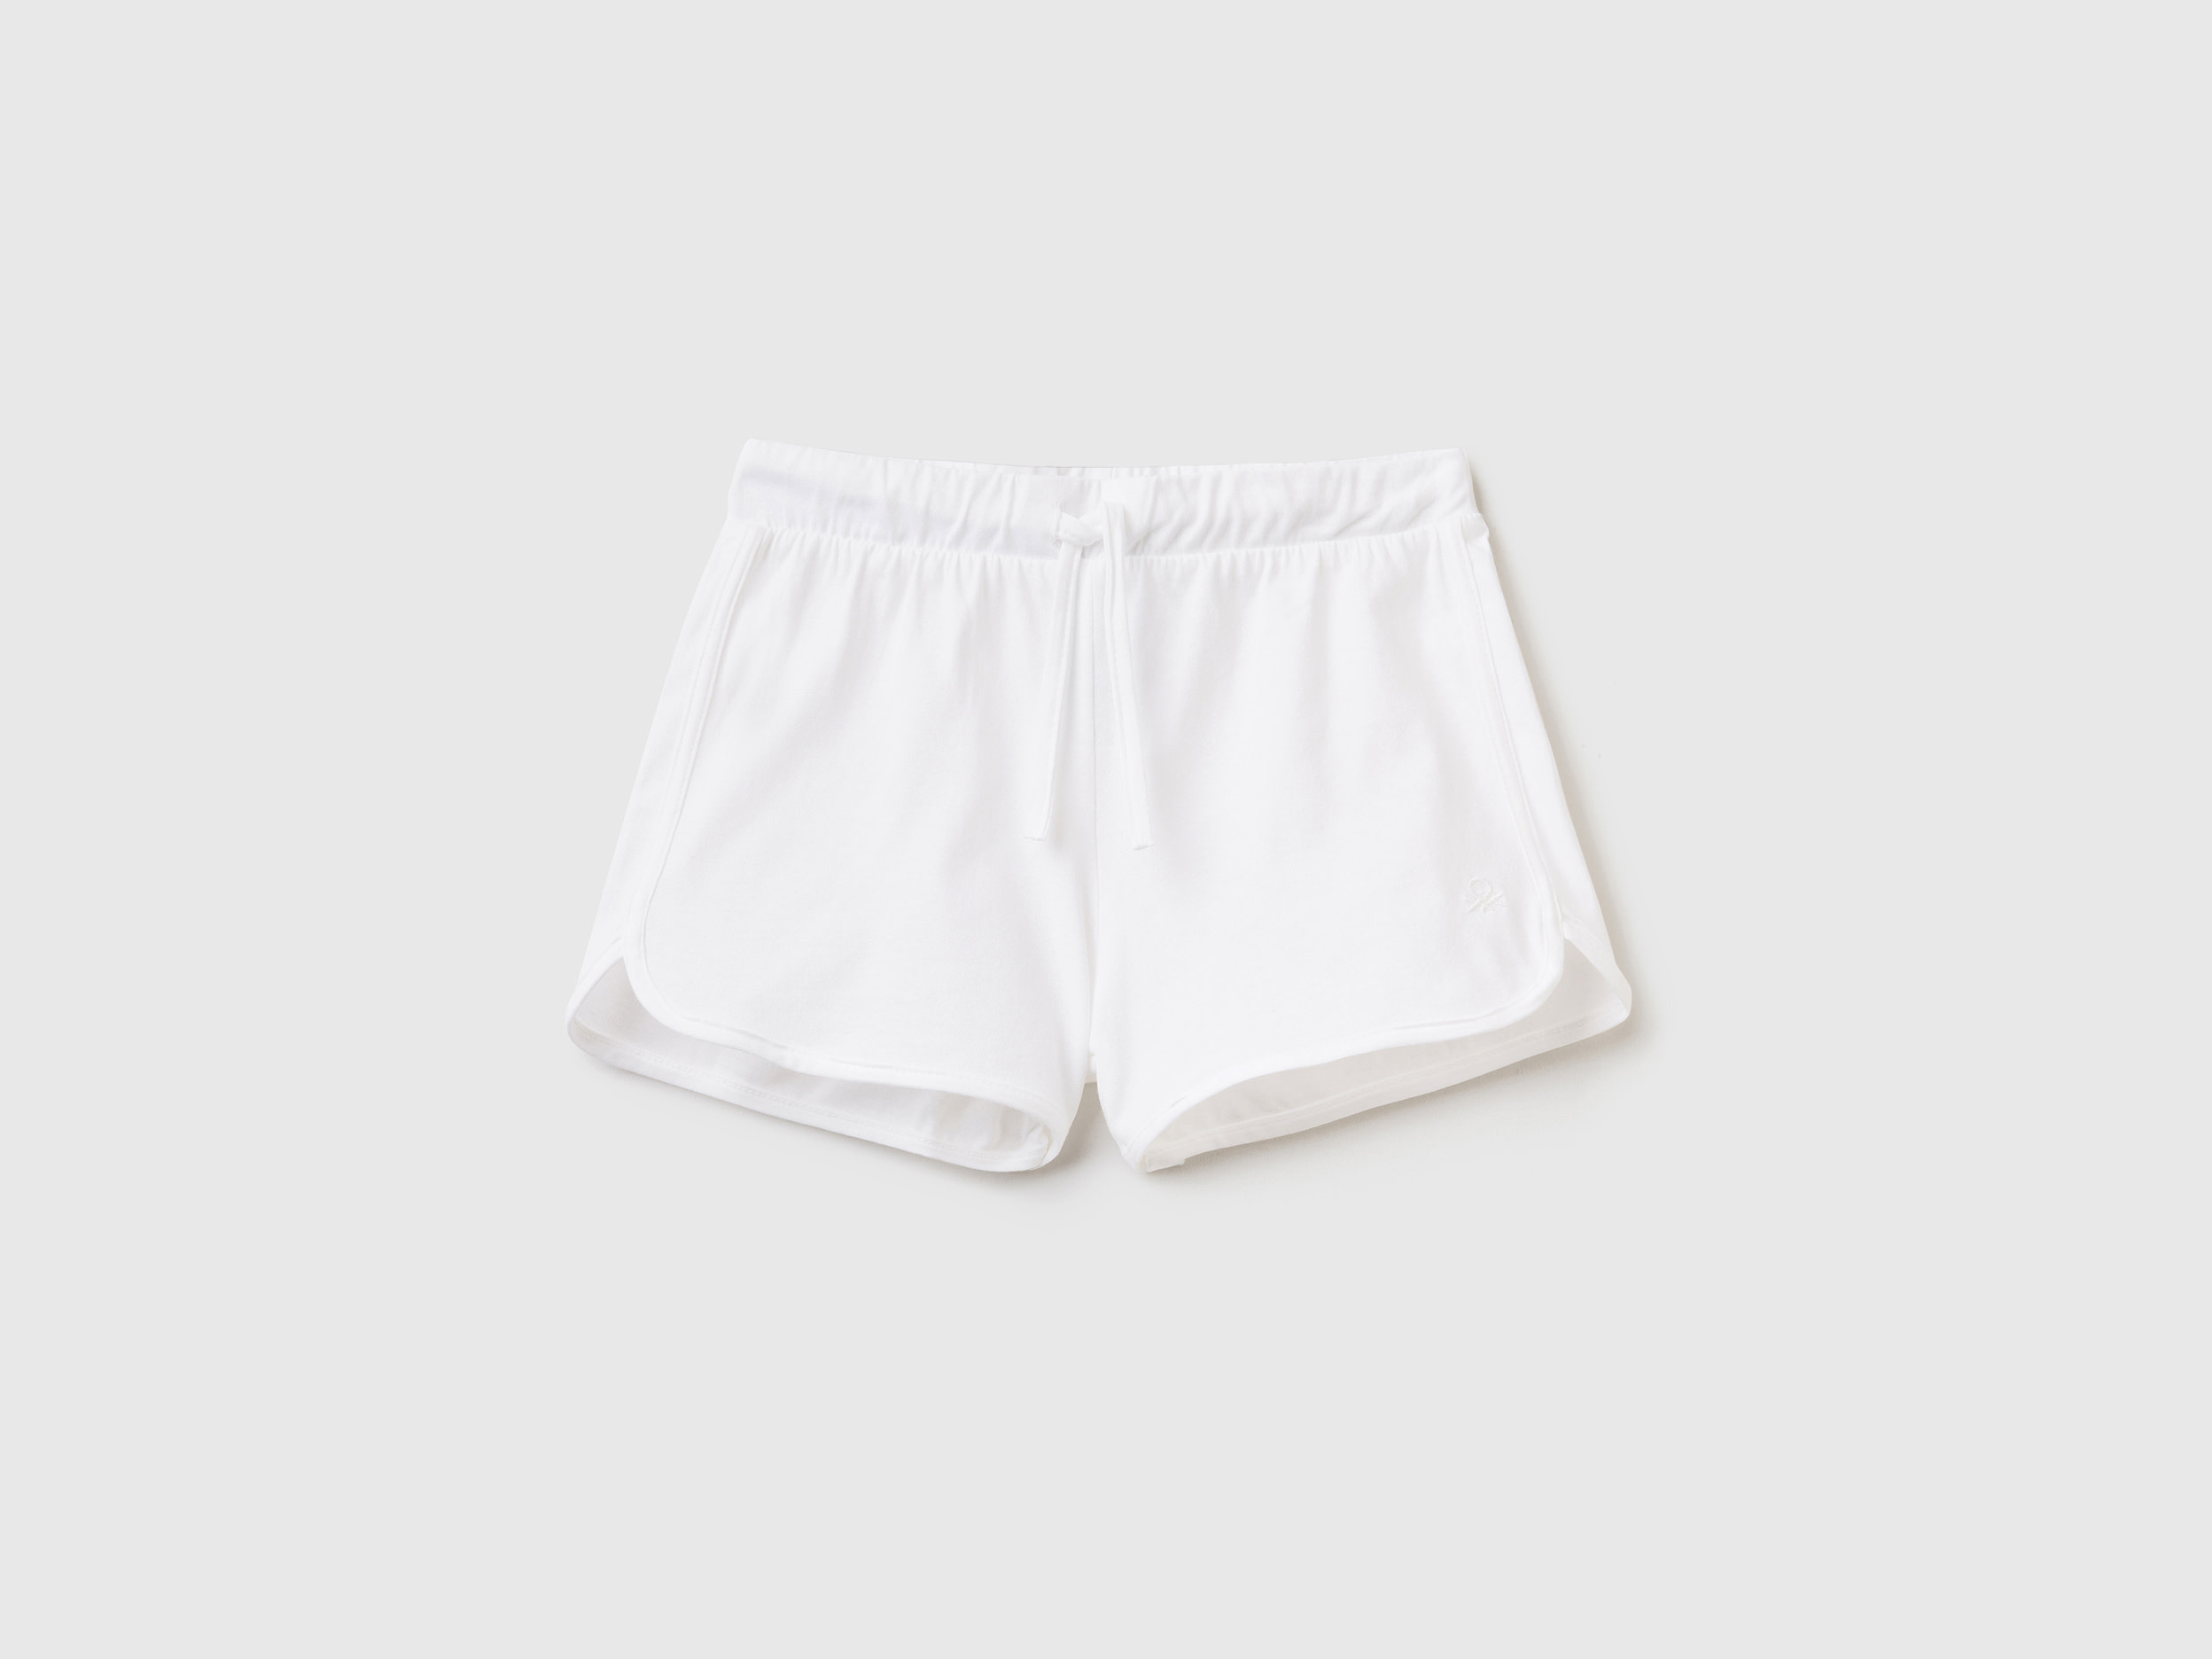 Image of Benetton, Runner Style Shorts In Organic Cotton, size S, White, Kids